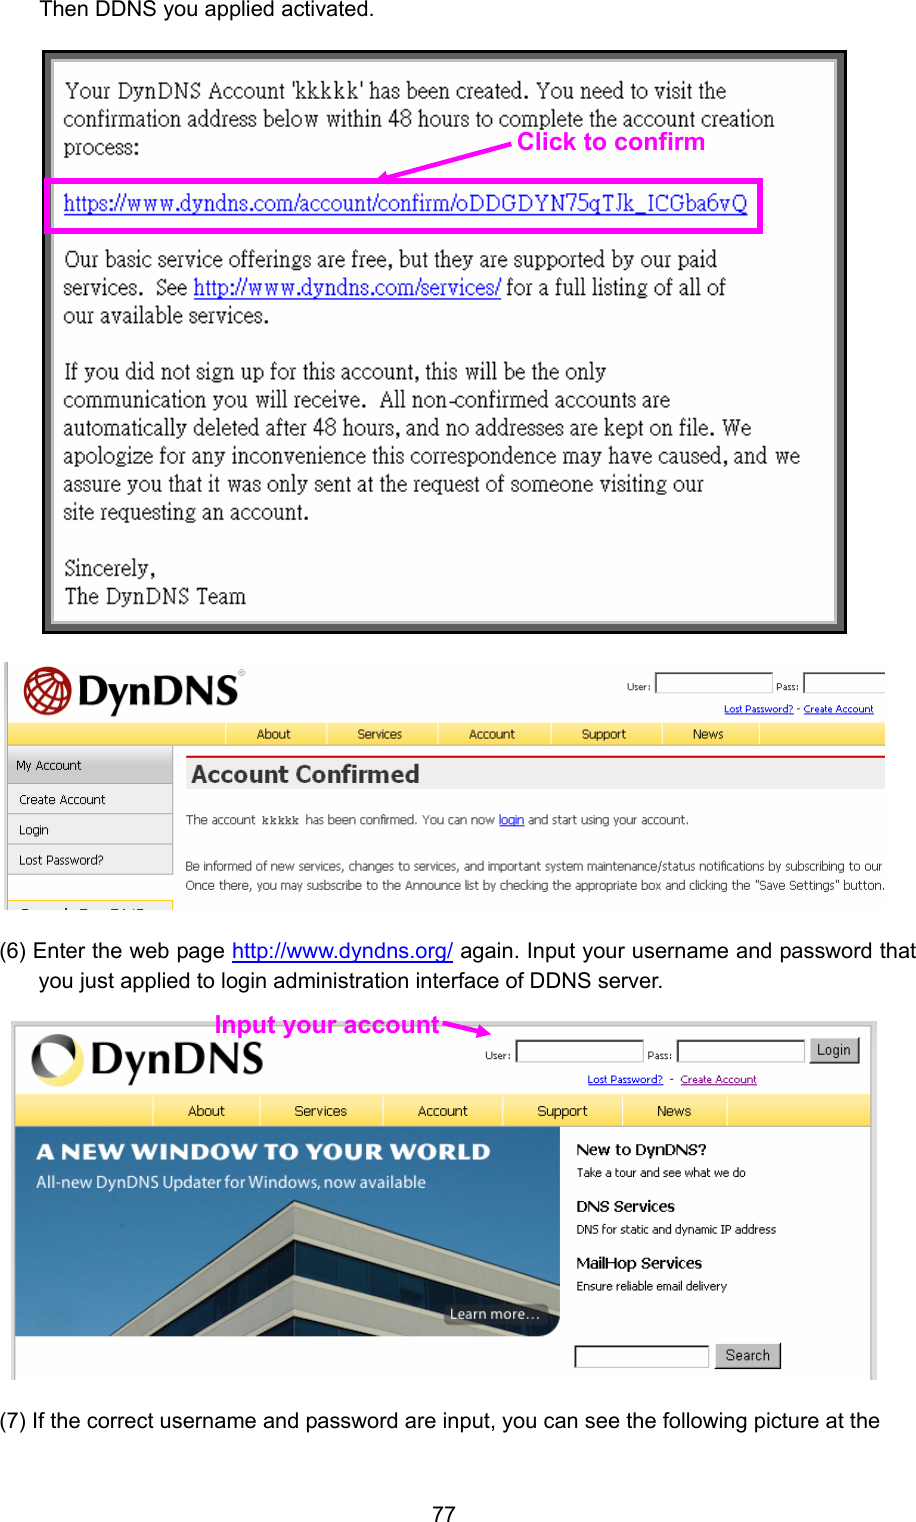  77 Then DDNS you applied activated.   (6) Enter the web page http://www.dyndns.org/ again. Input your username and password that you just applied to login administration interface of DDNS server.  (7) If the correct username and password are input, you can see the following picture at the Click to confirm Input your account 